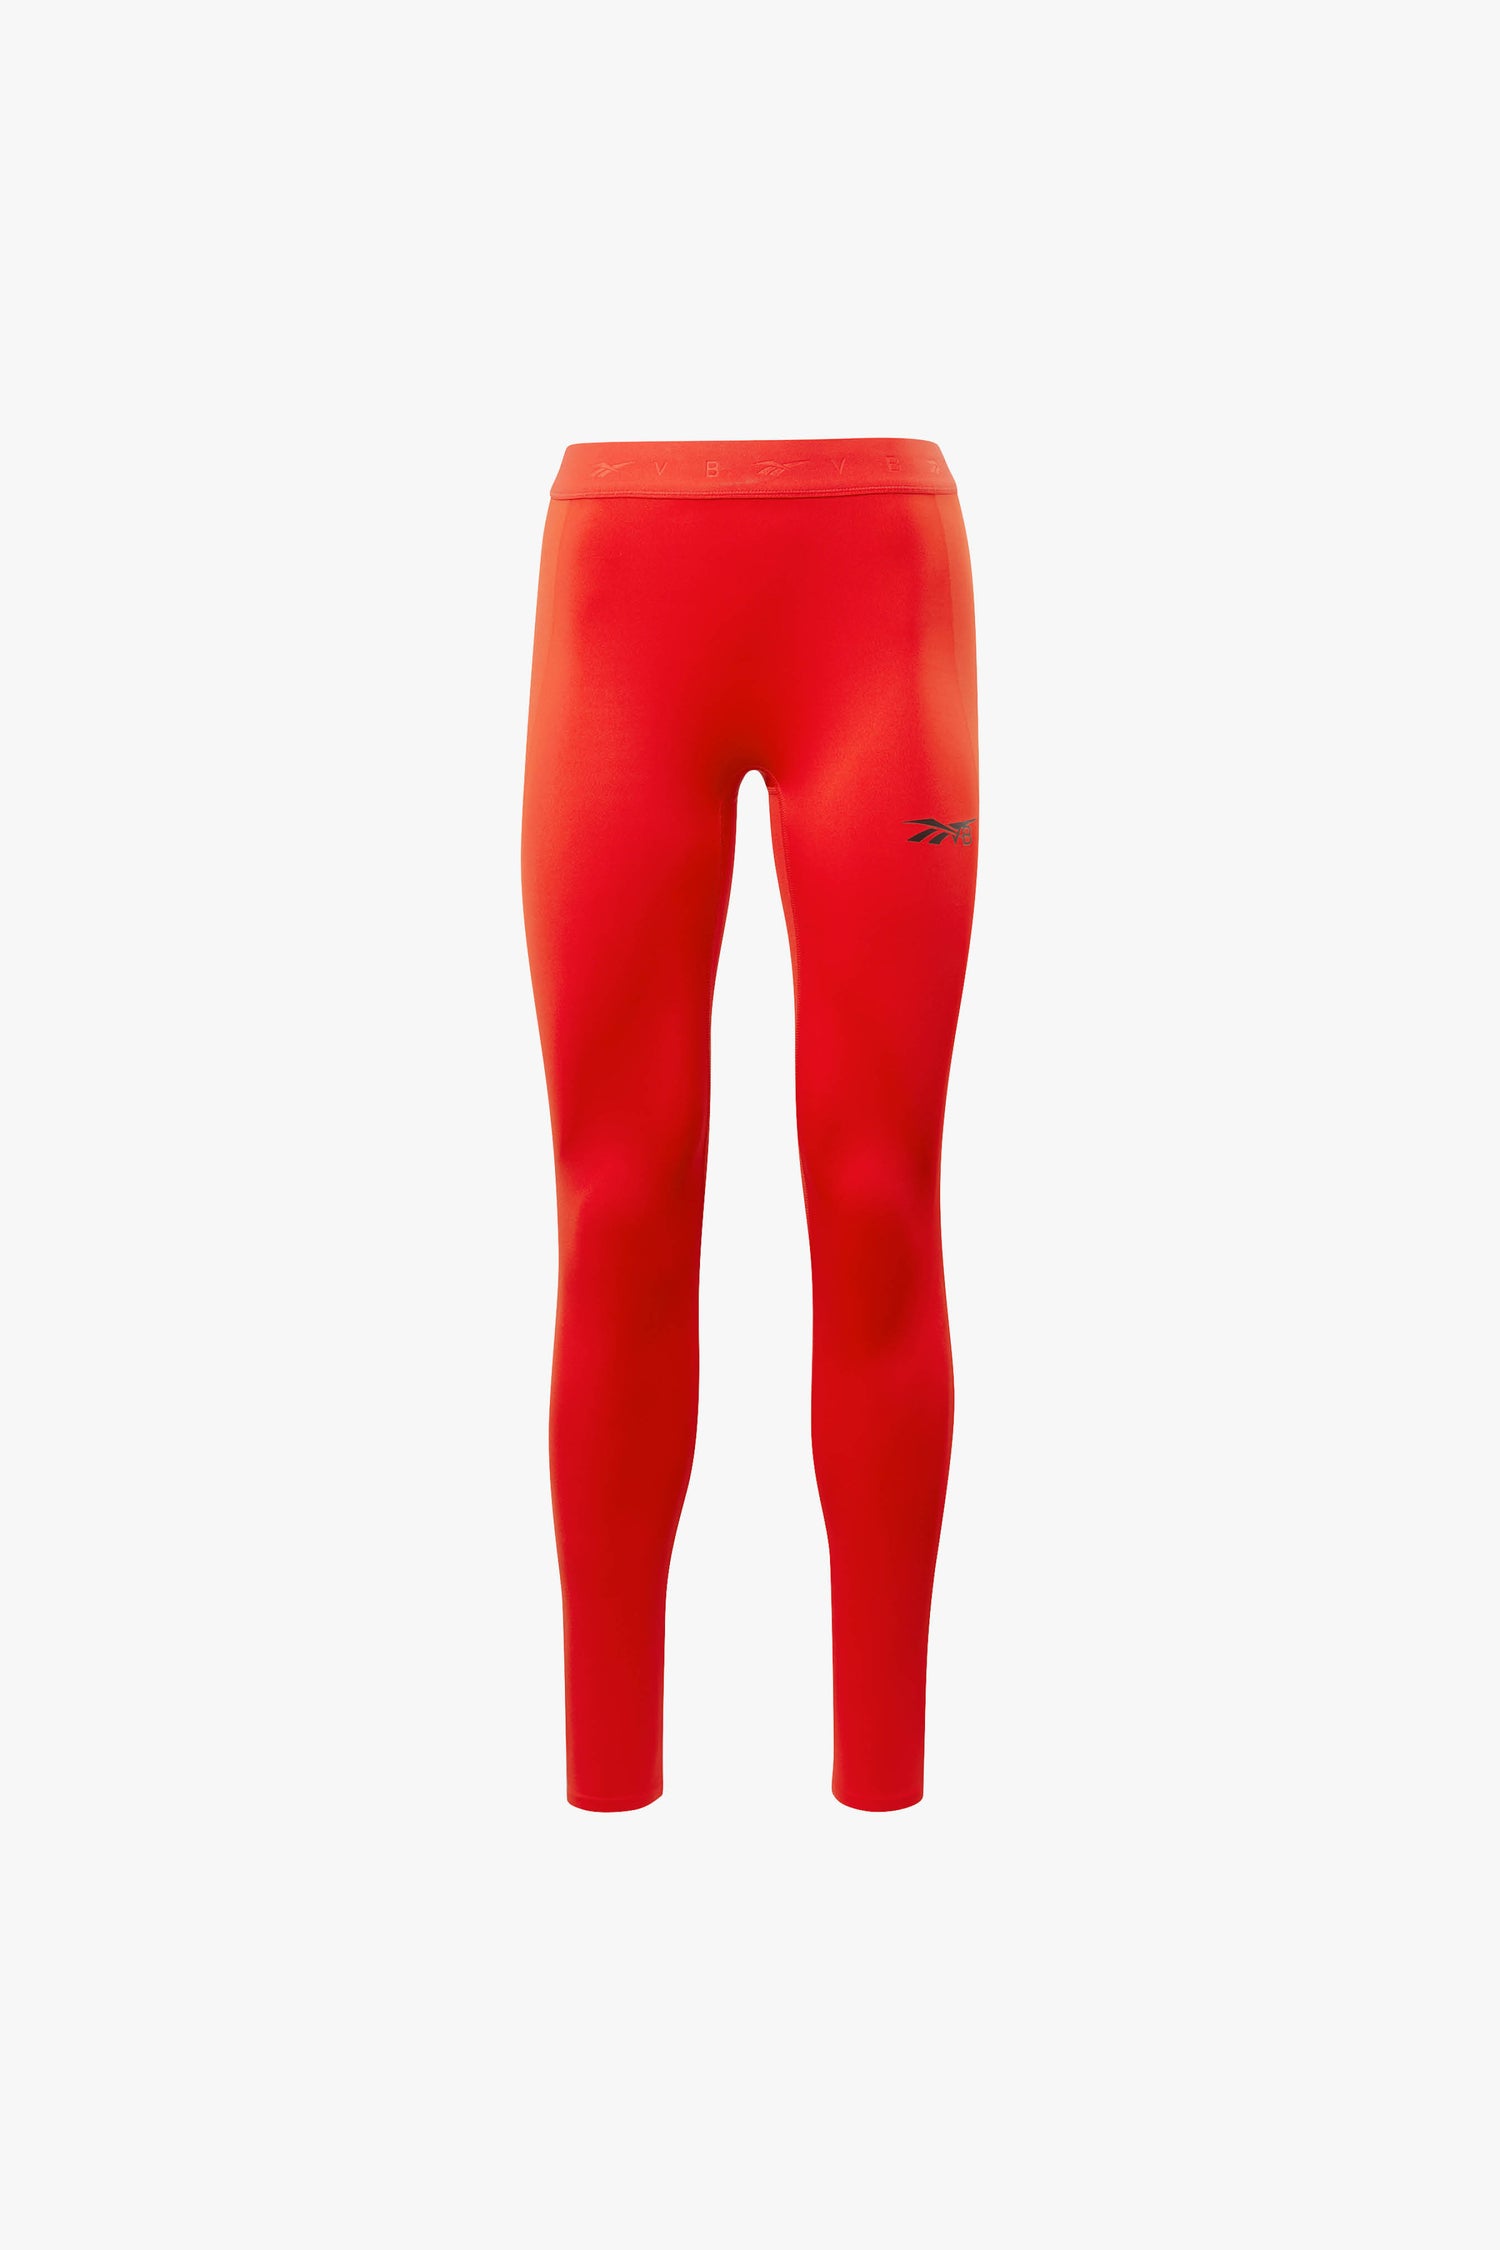 Reebok X Vb Performance Tight In Instant Red Victoria Beckham